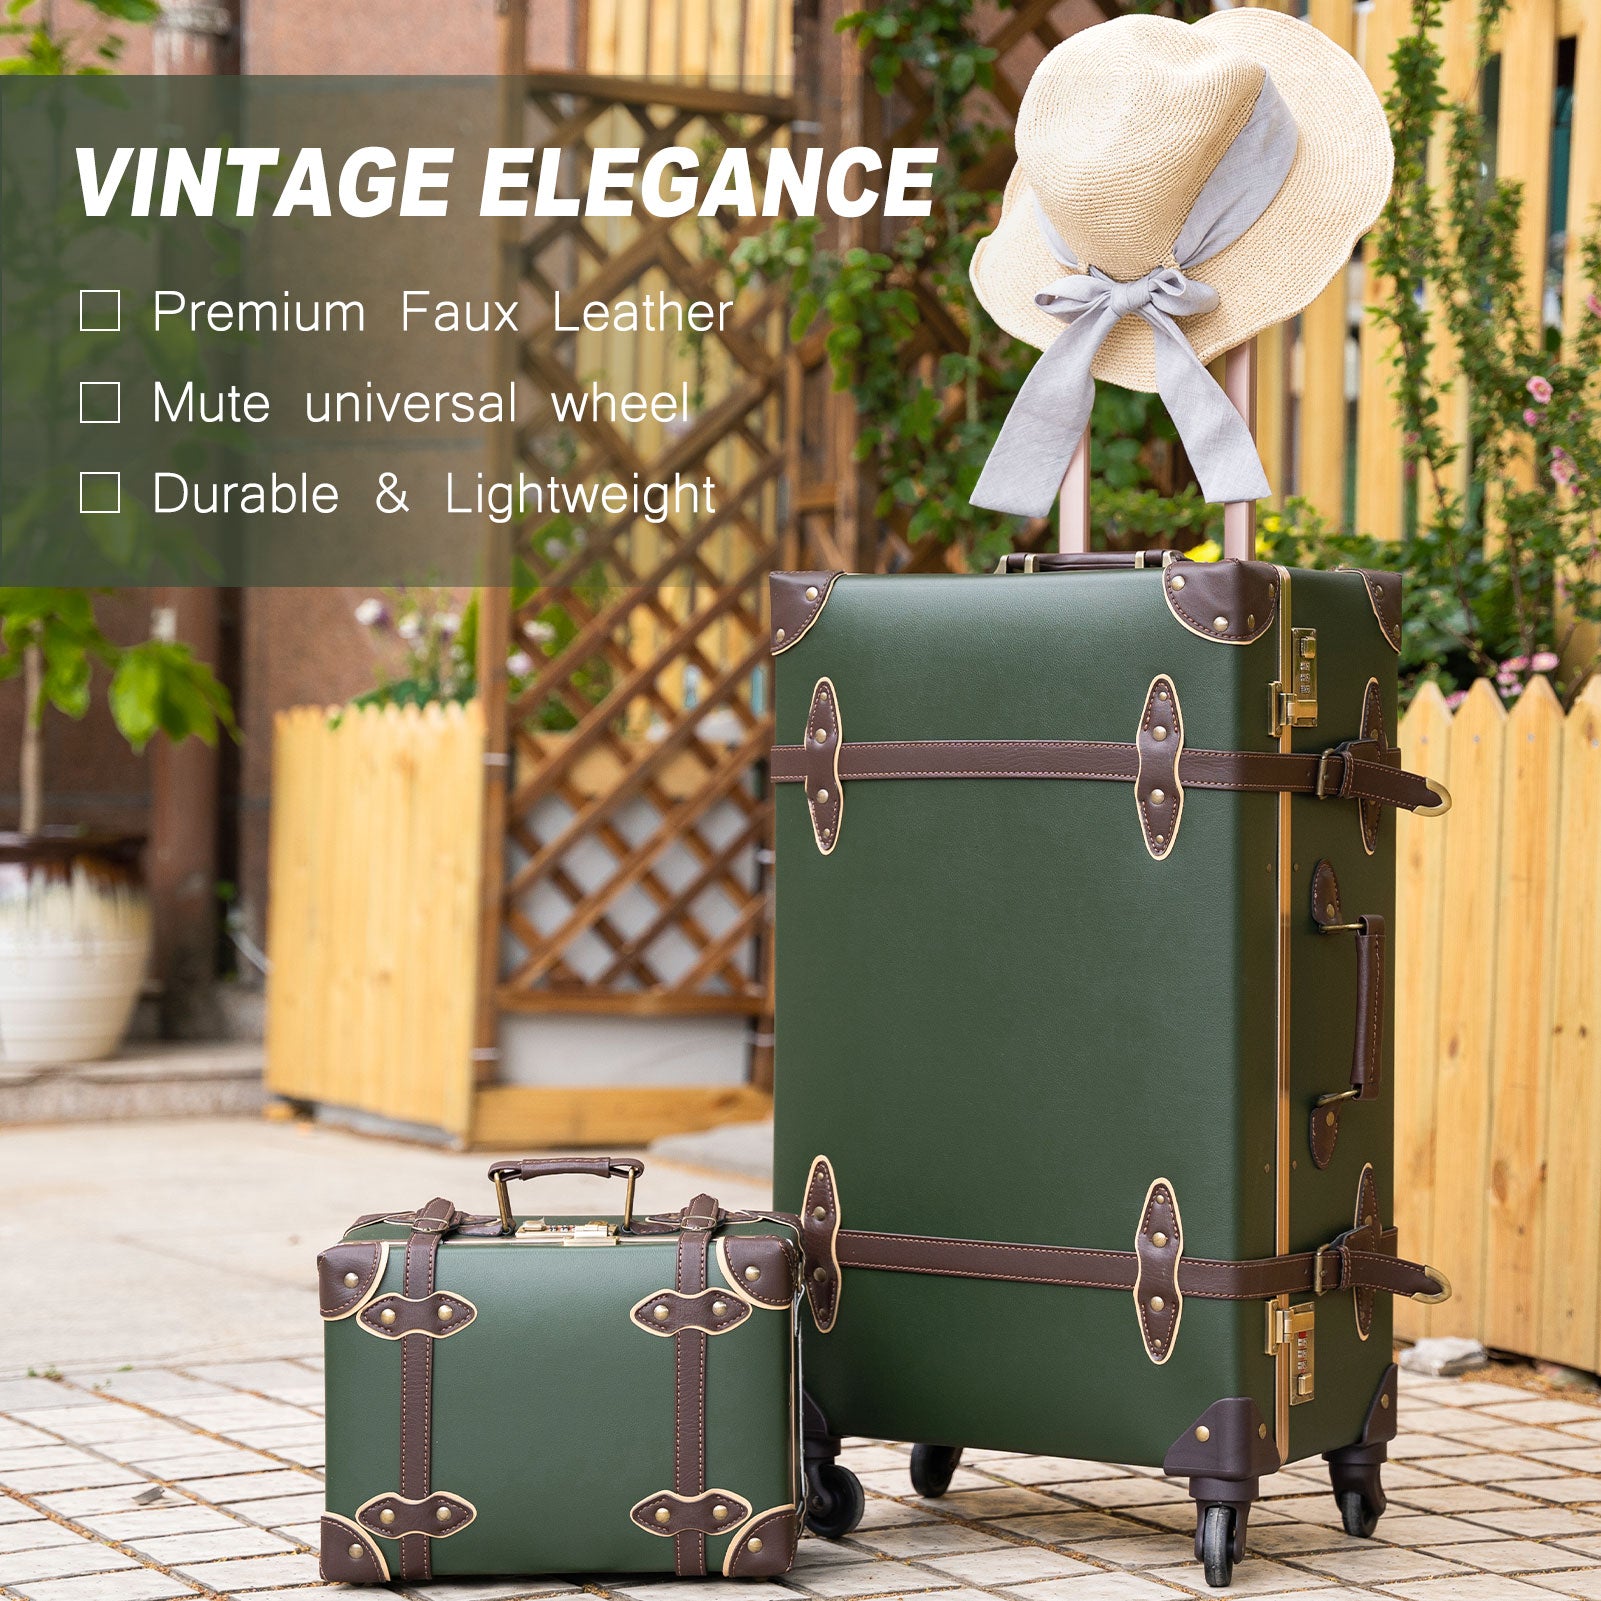 urecity Vintage Luggage Set of 2, Retro Suitcase Trunk with Wheels for Men  and Women, Cute Designer Travel Luggage Set with Boarding Tote Black